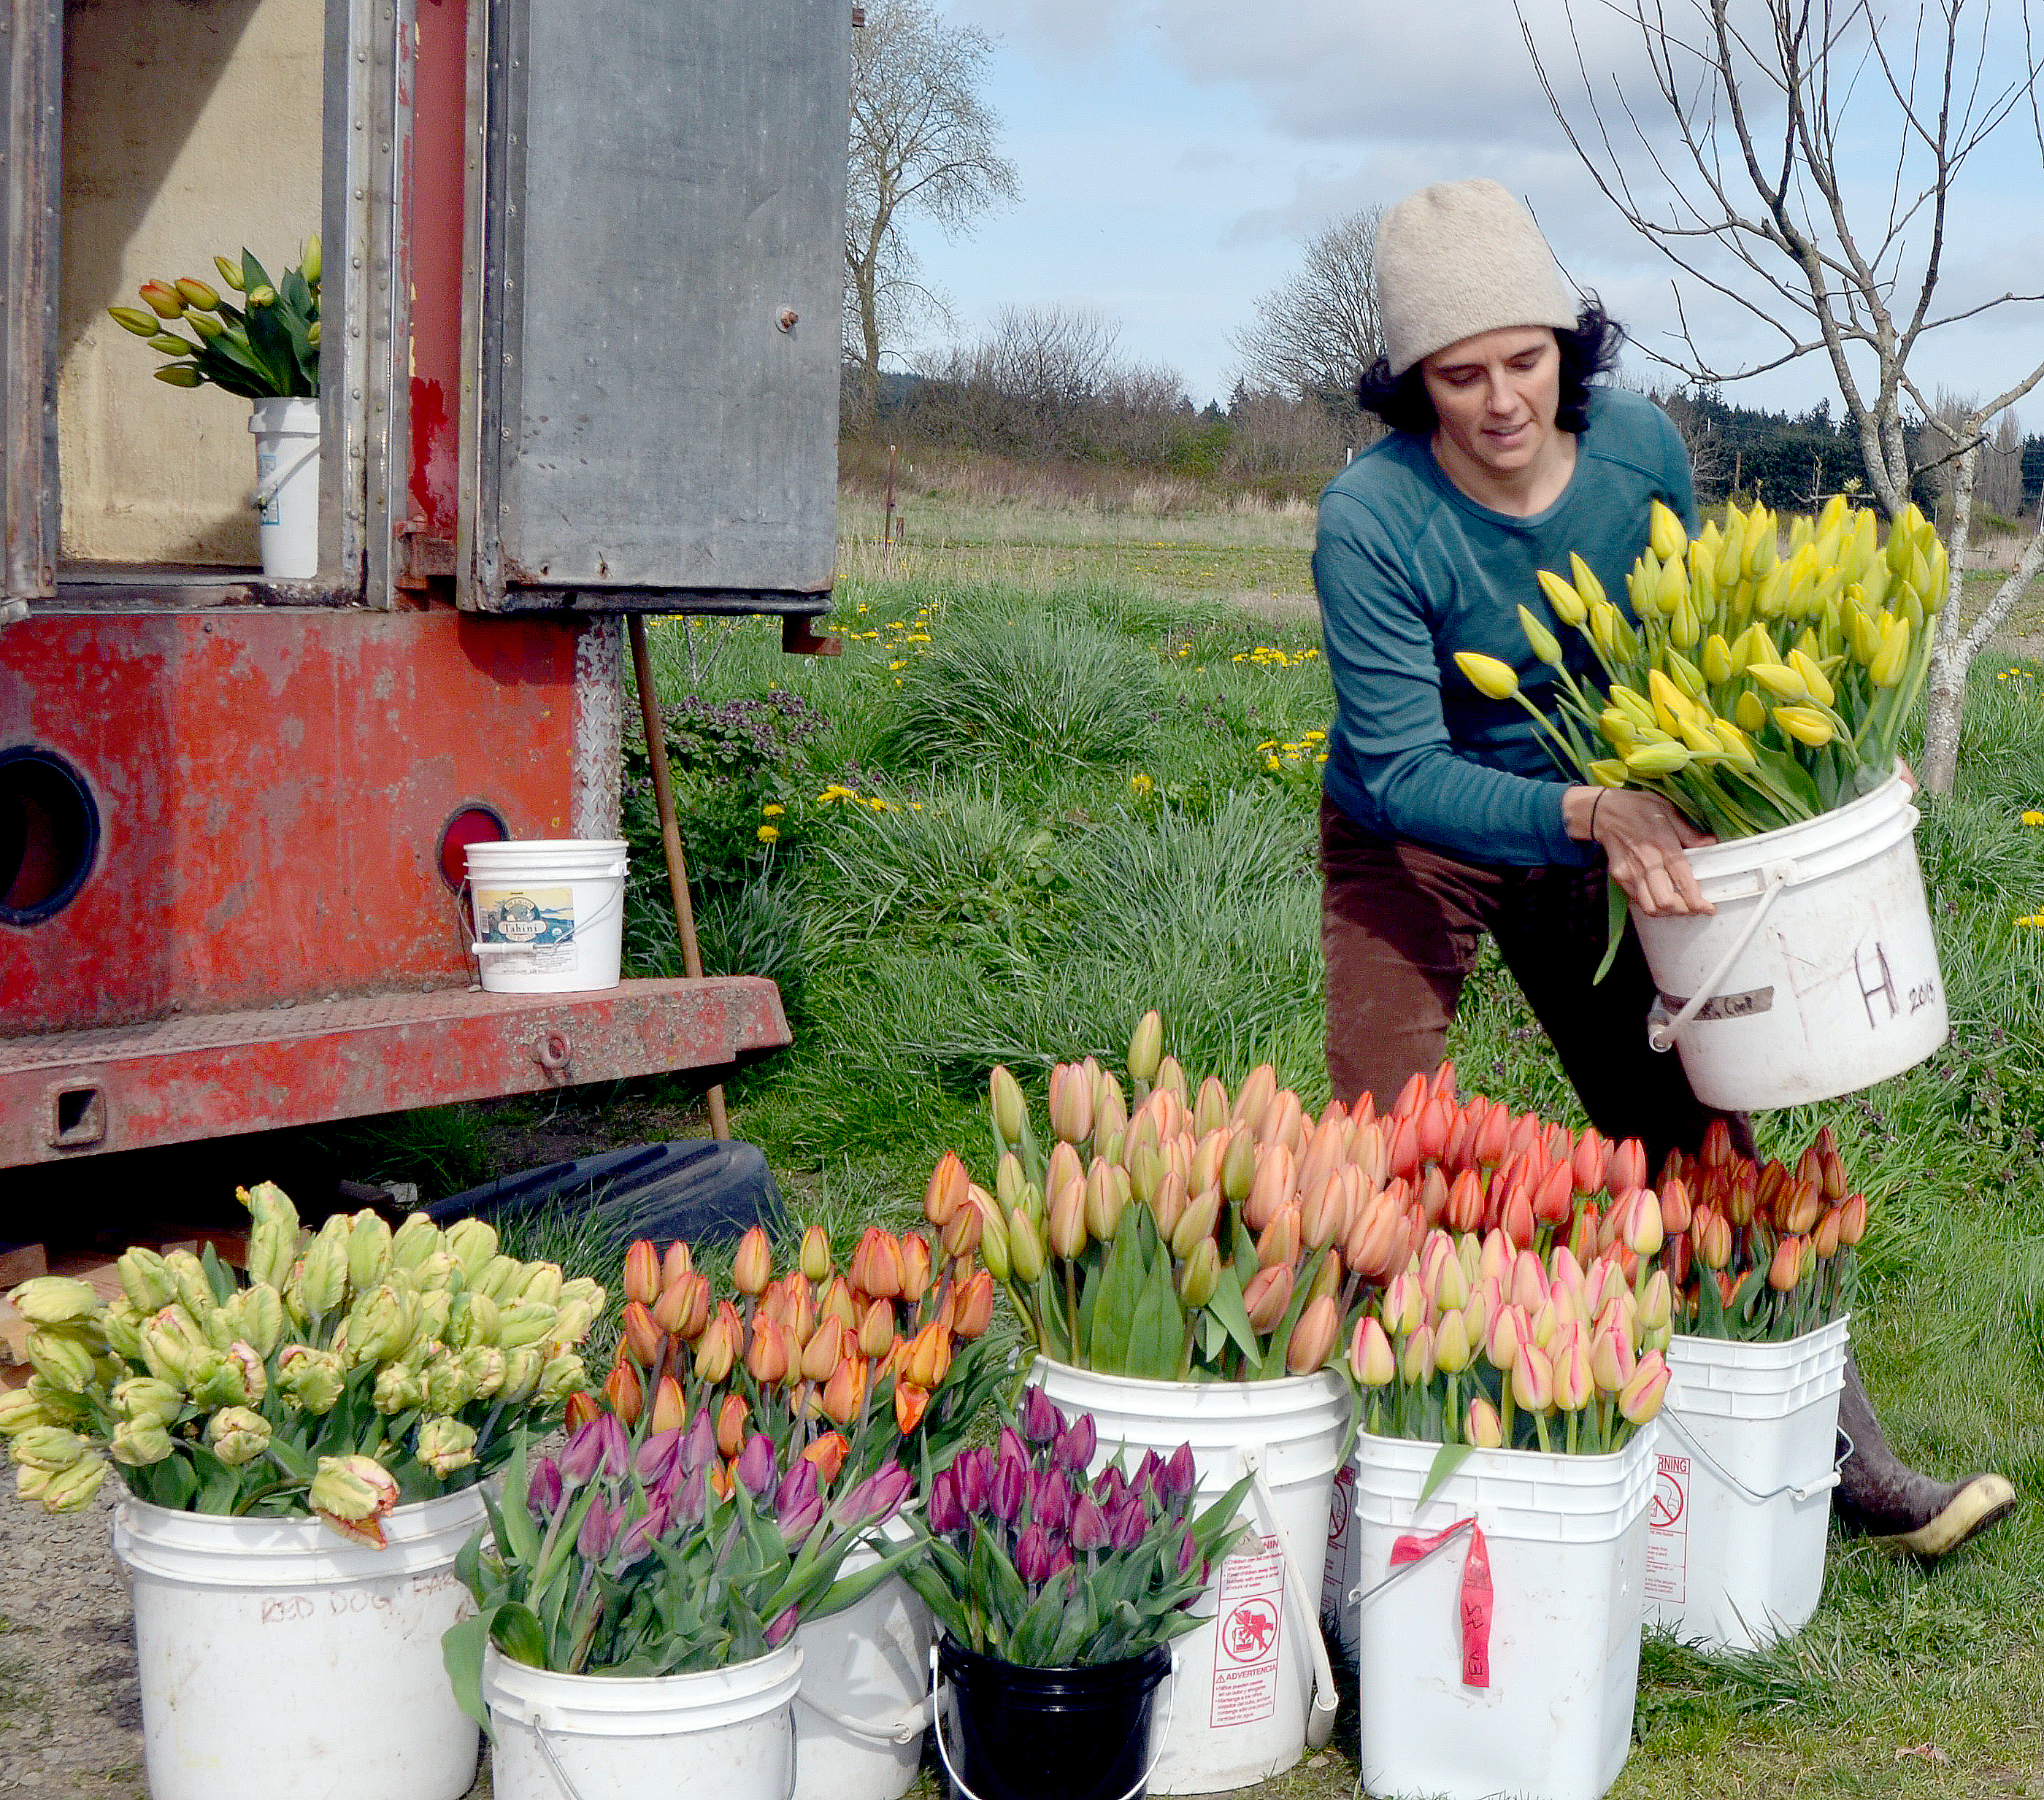 Red Dog Farm owner Karyn Williams prepares tulips to be sold at Saturday’s opening day of the Port Townsend Farmer’s Market.  —Photo by Charlie Bermant/Peninsula Daily News ()